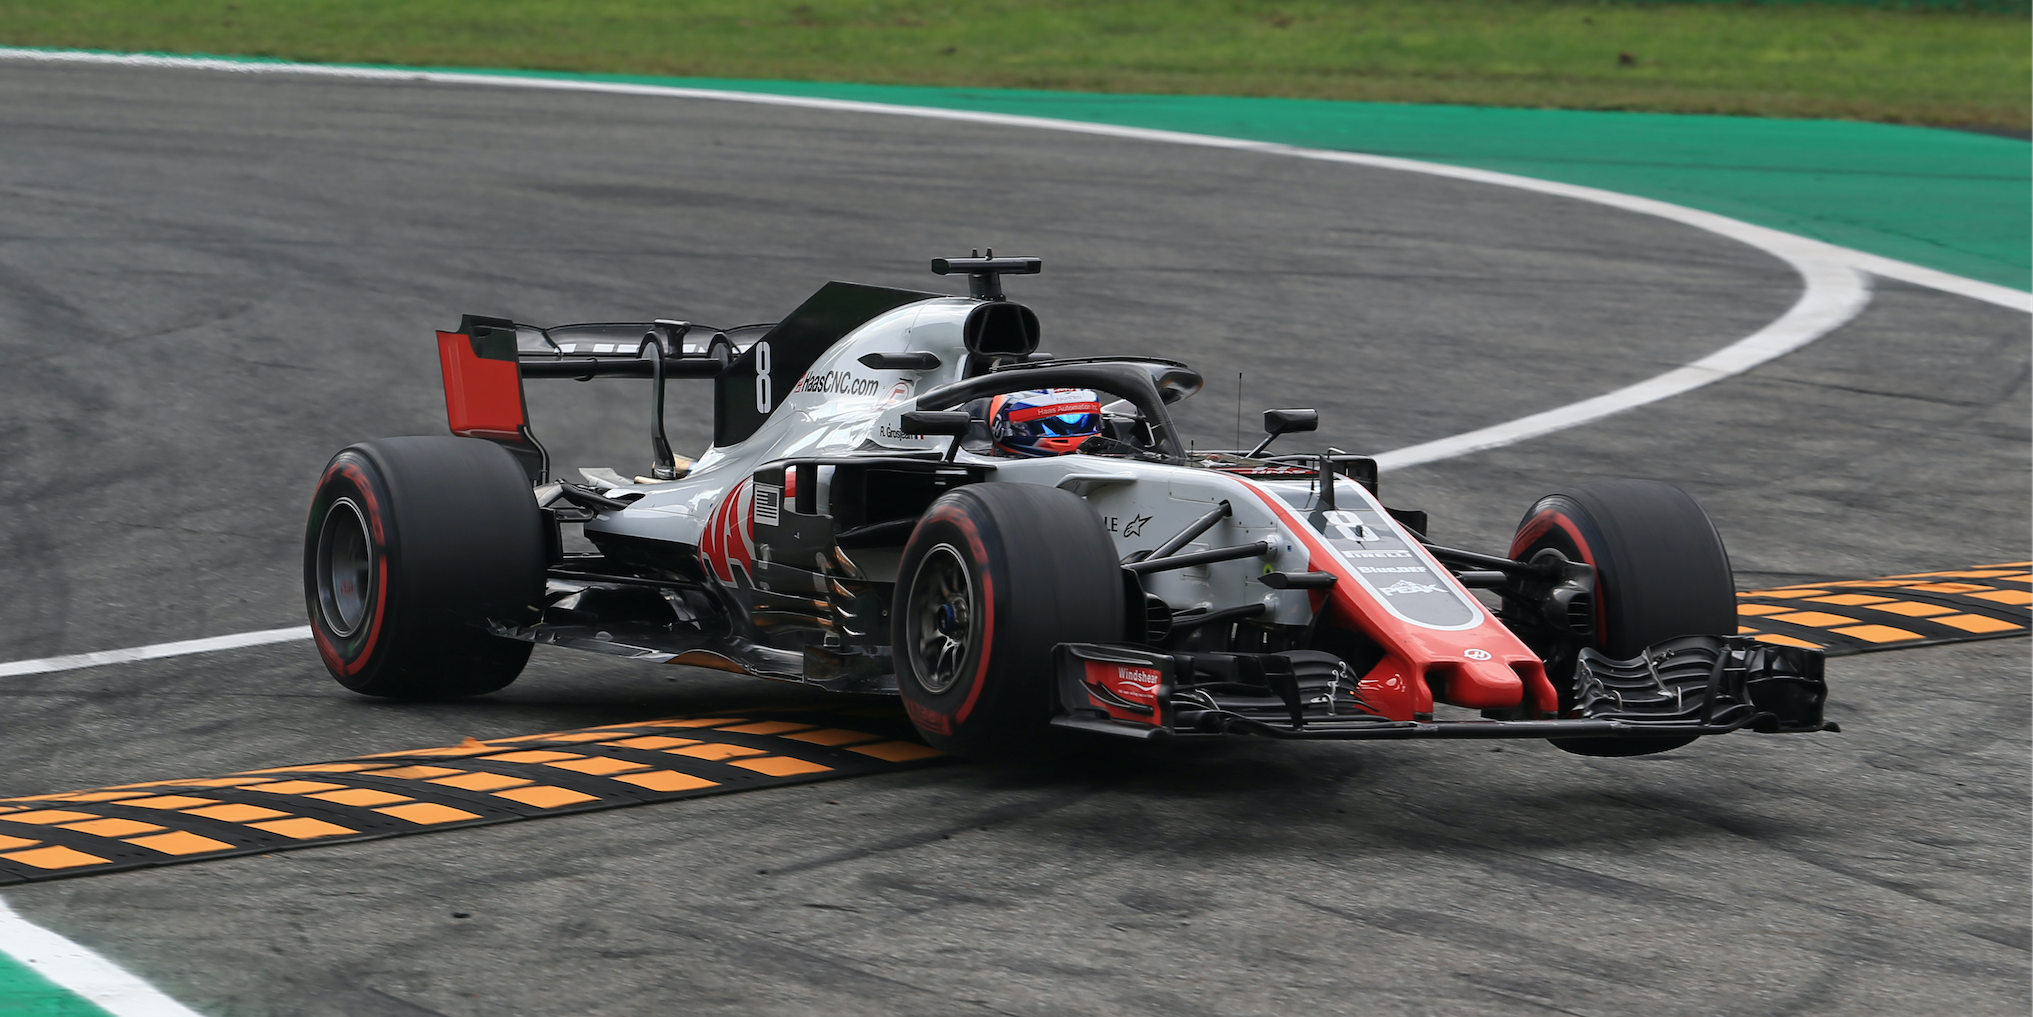 Why Haas Was Disqualified From the Italian Grand Prix